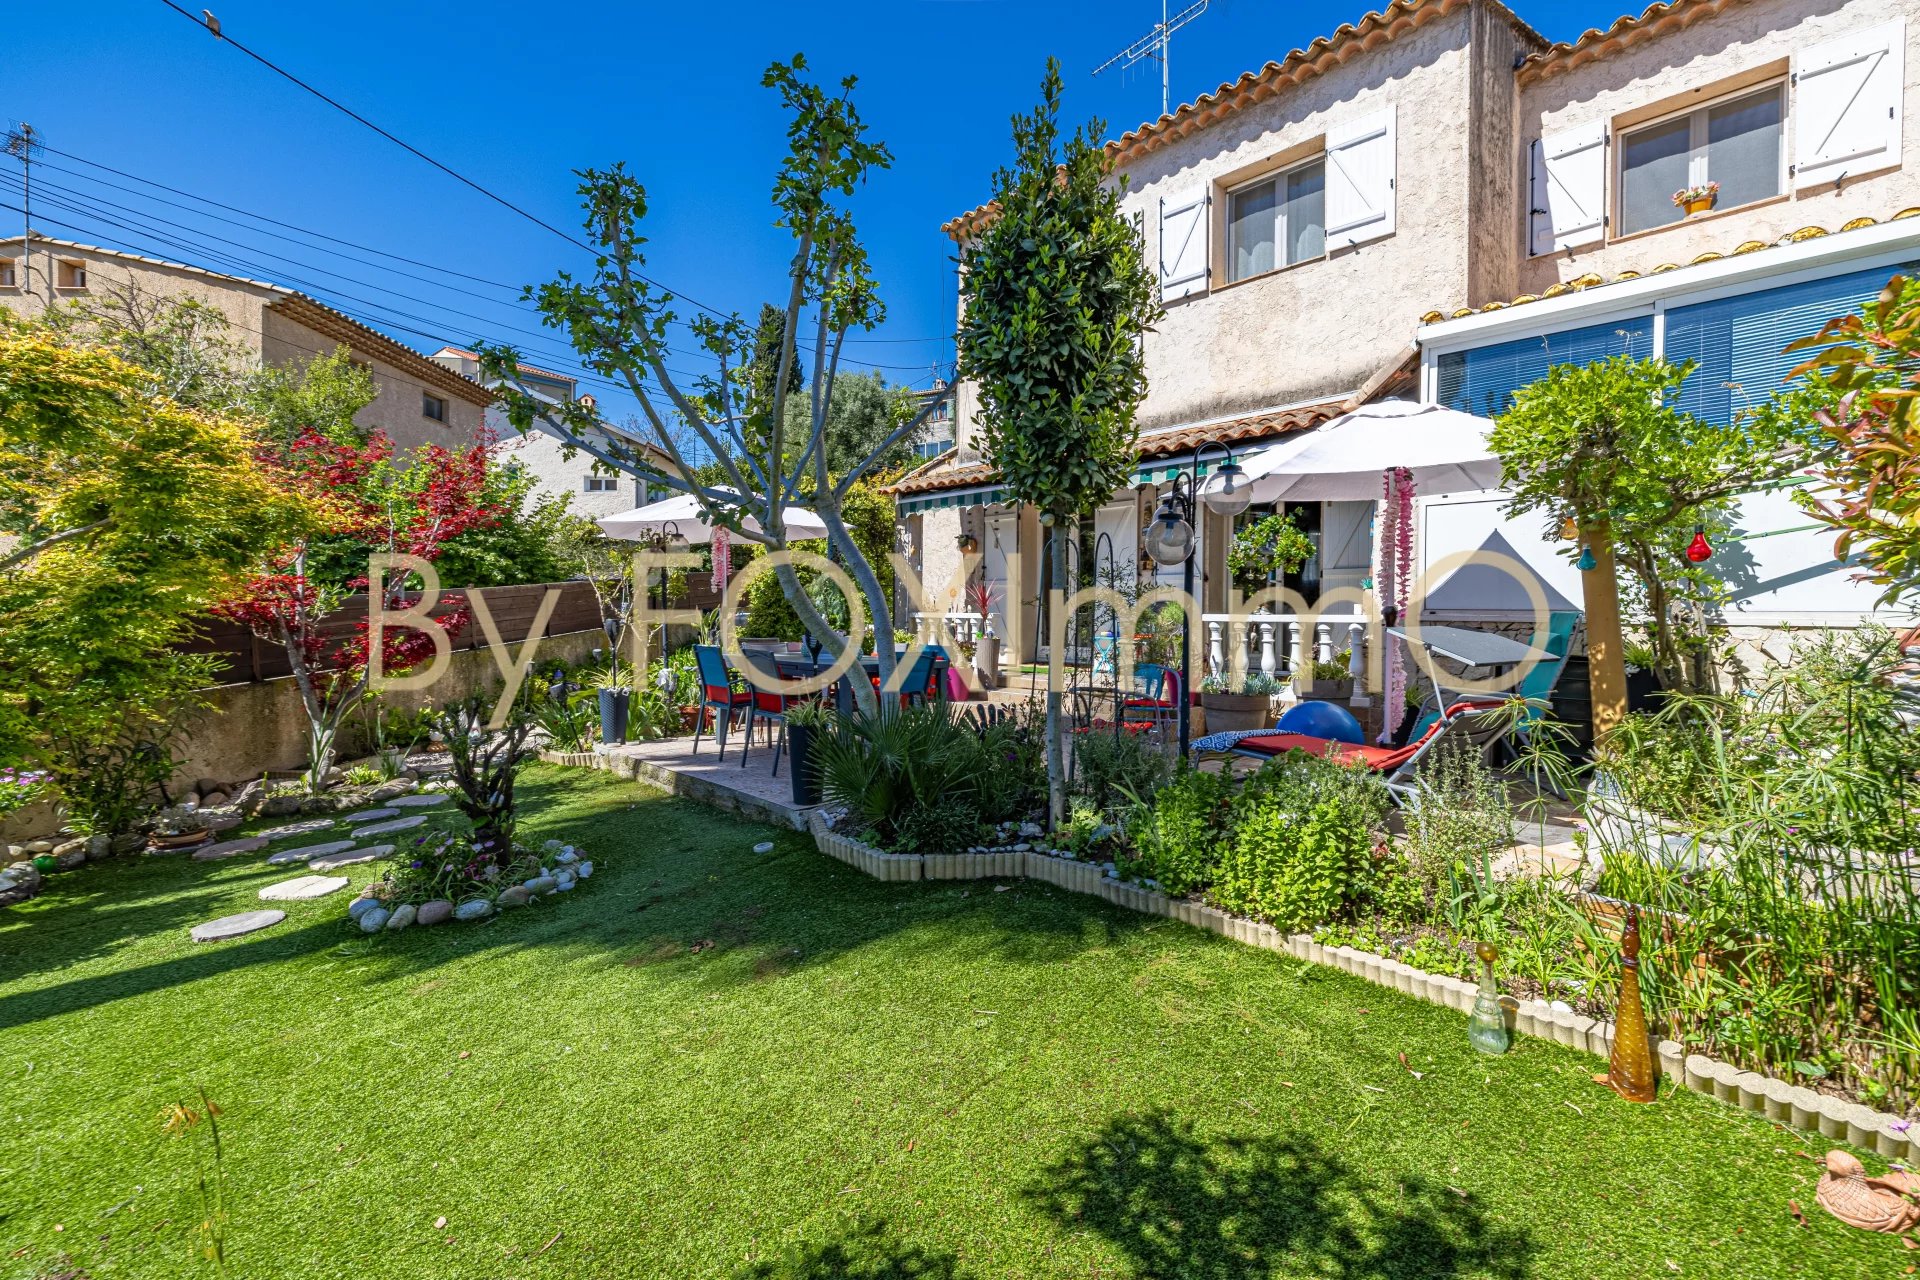 Charming semi-detached villa in Cagnes-Sur-Mer, close to all amenities